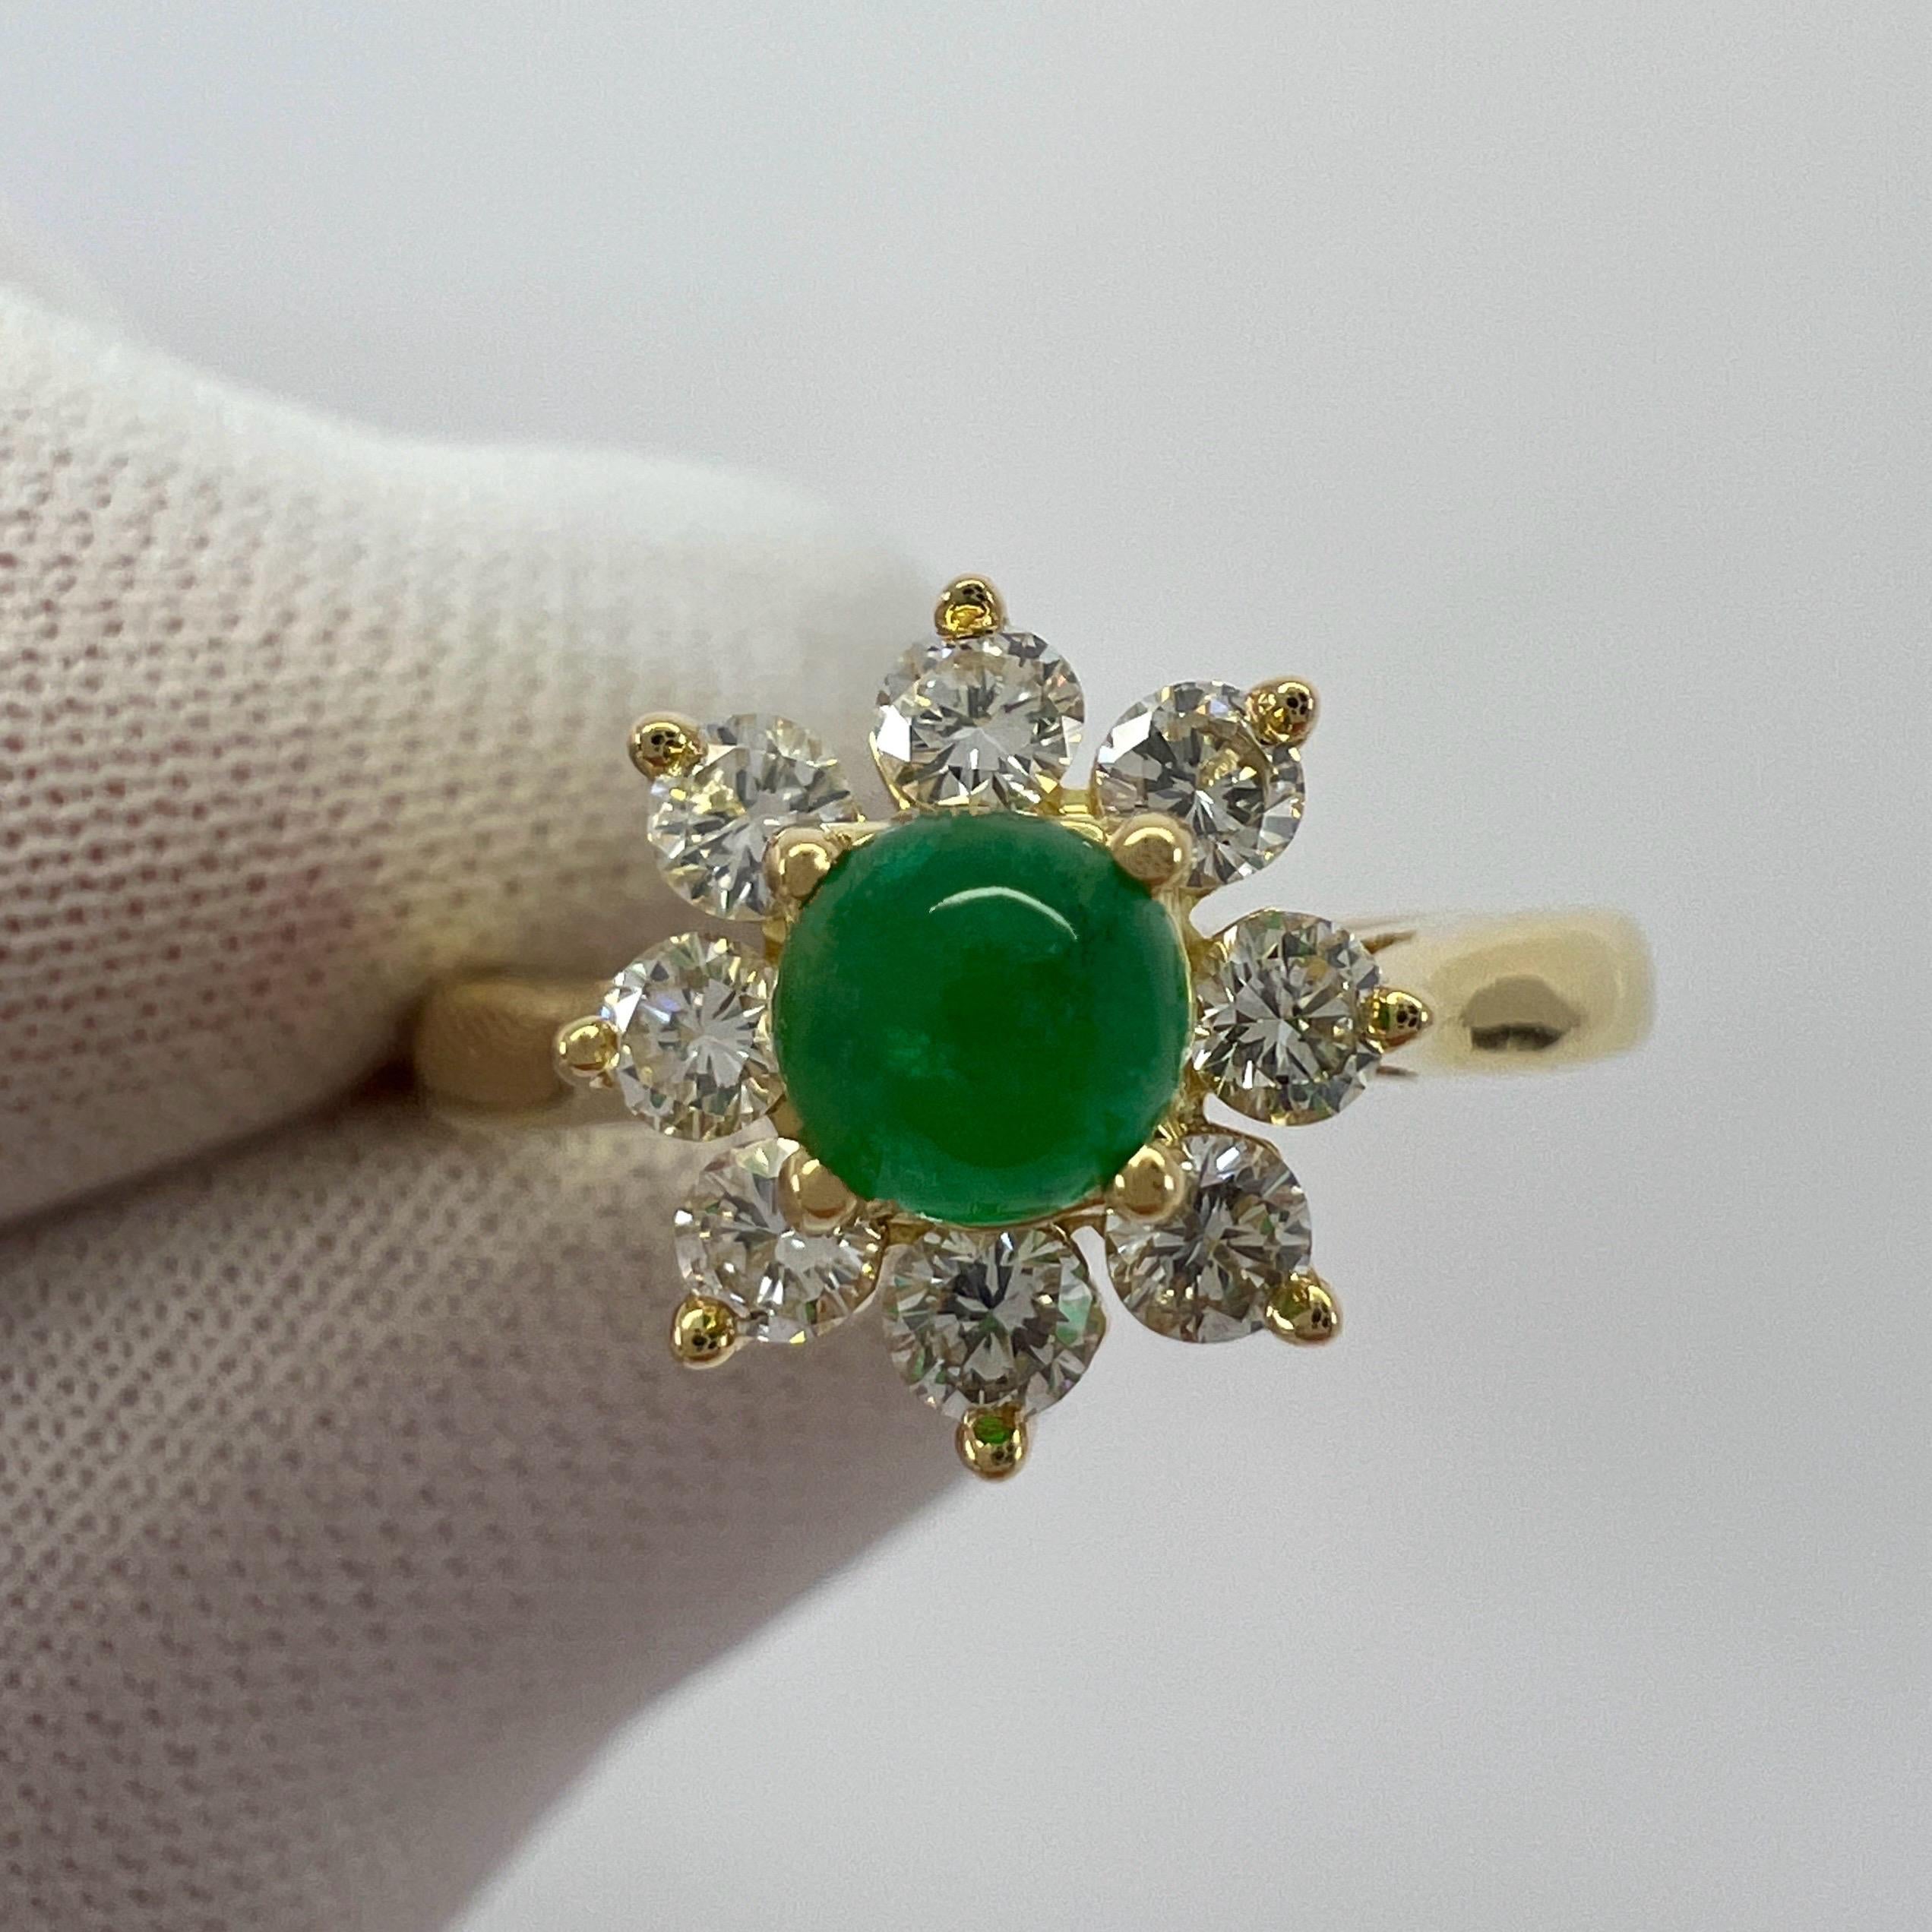 Vintage Tiffany & Co. Natural Round Cabochon Emerald And Diamond 18k Yellow Gold Flower 'Buttercup' Ring.

A beautifully made yellow gold cluster ring set with a stunning 4.2 mm round cabochon cut natural emerald centre stone. Superb colour with